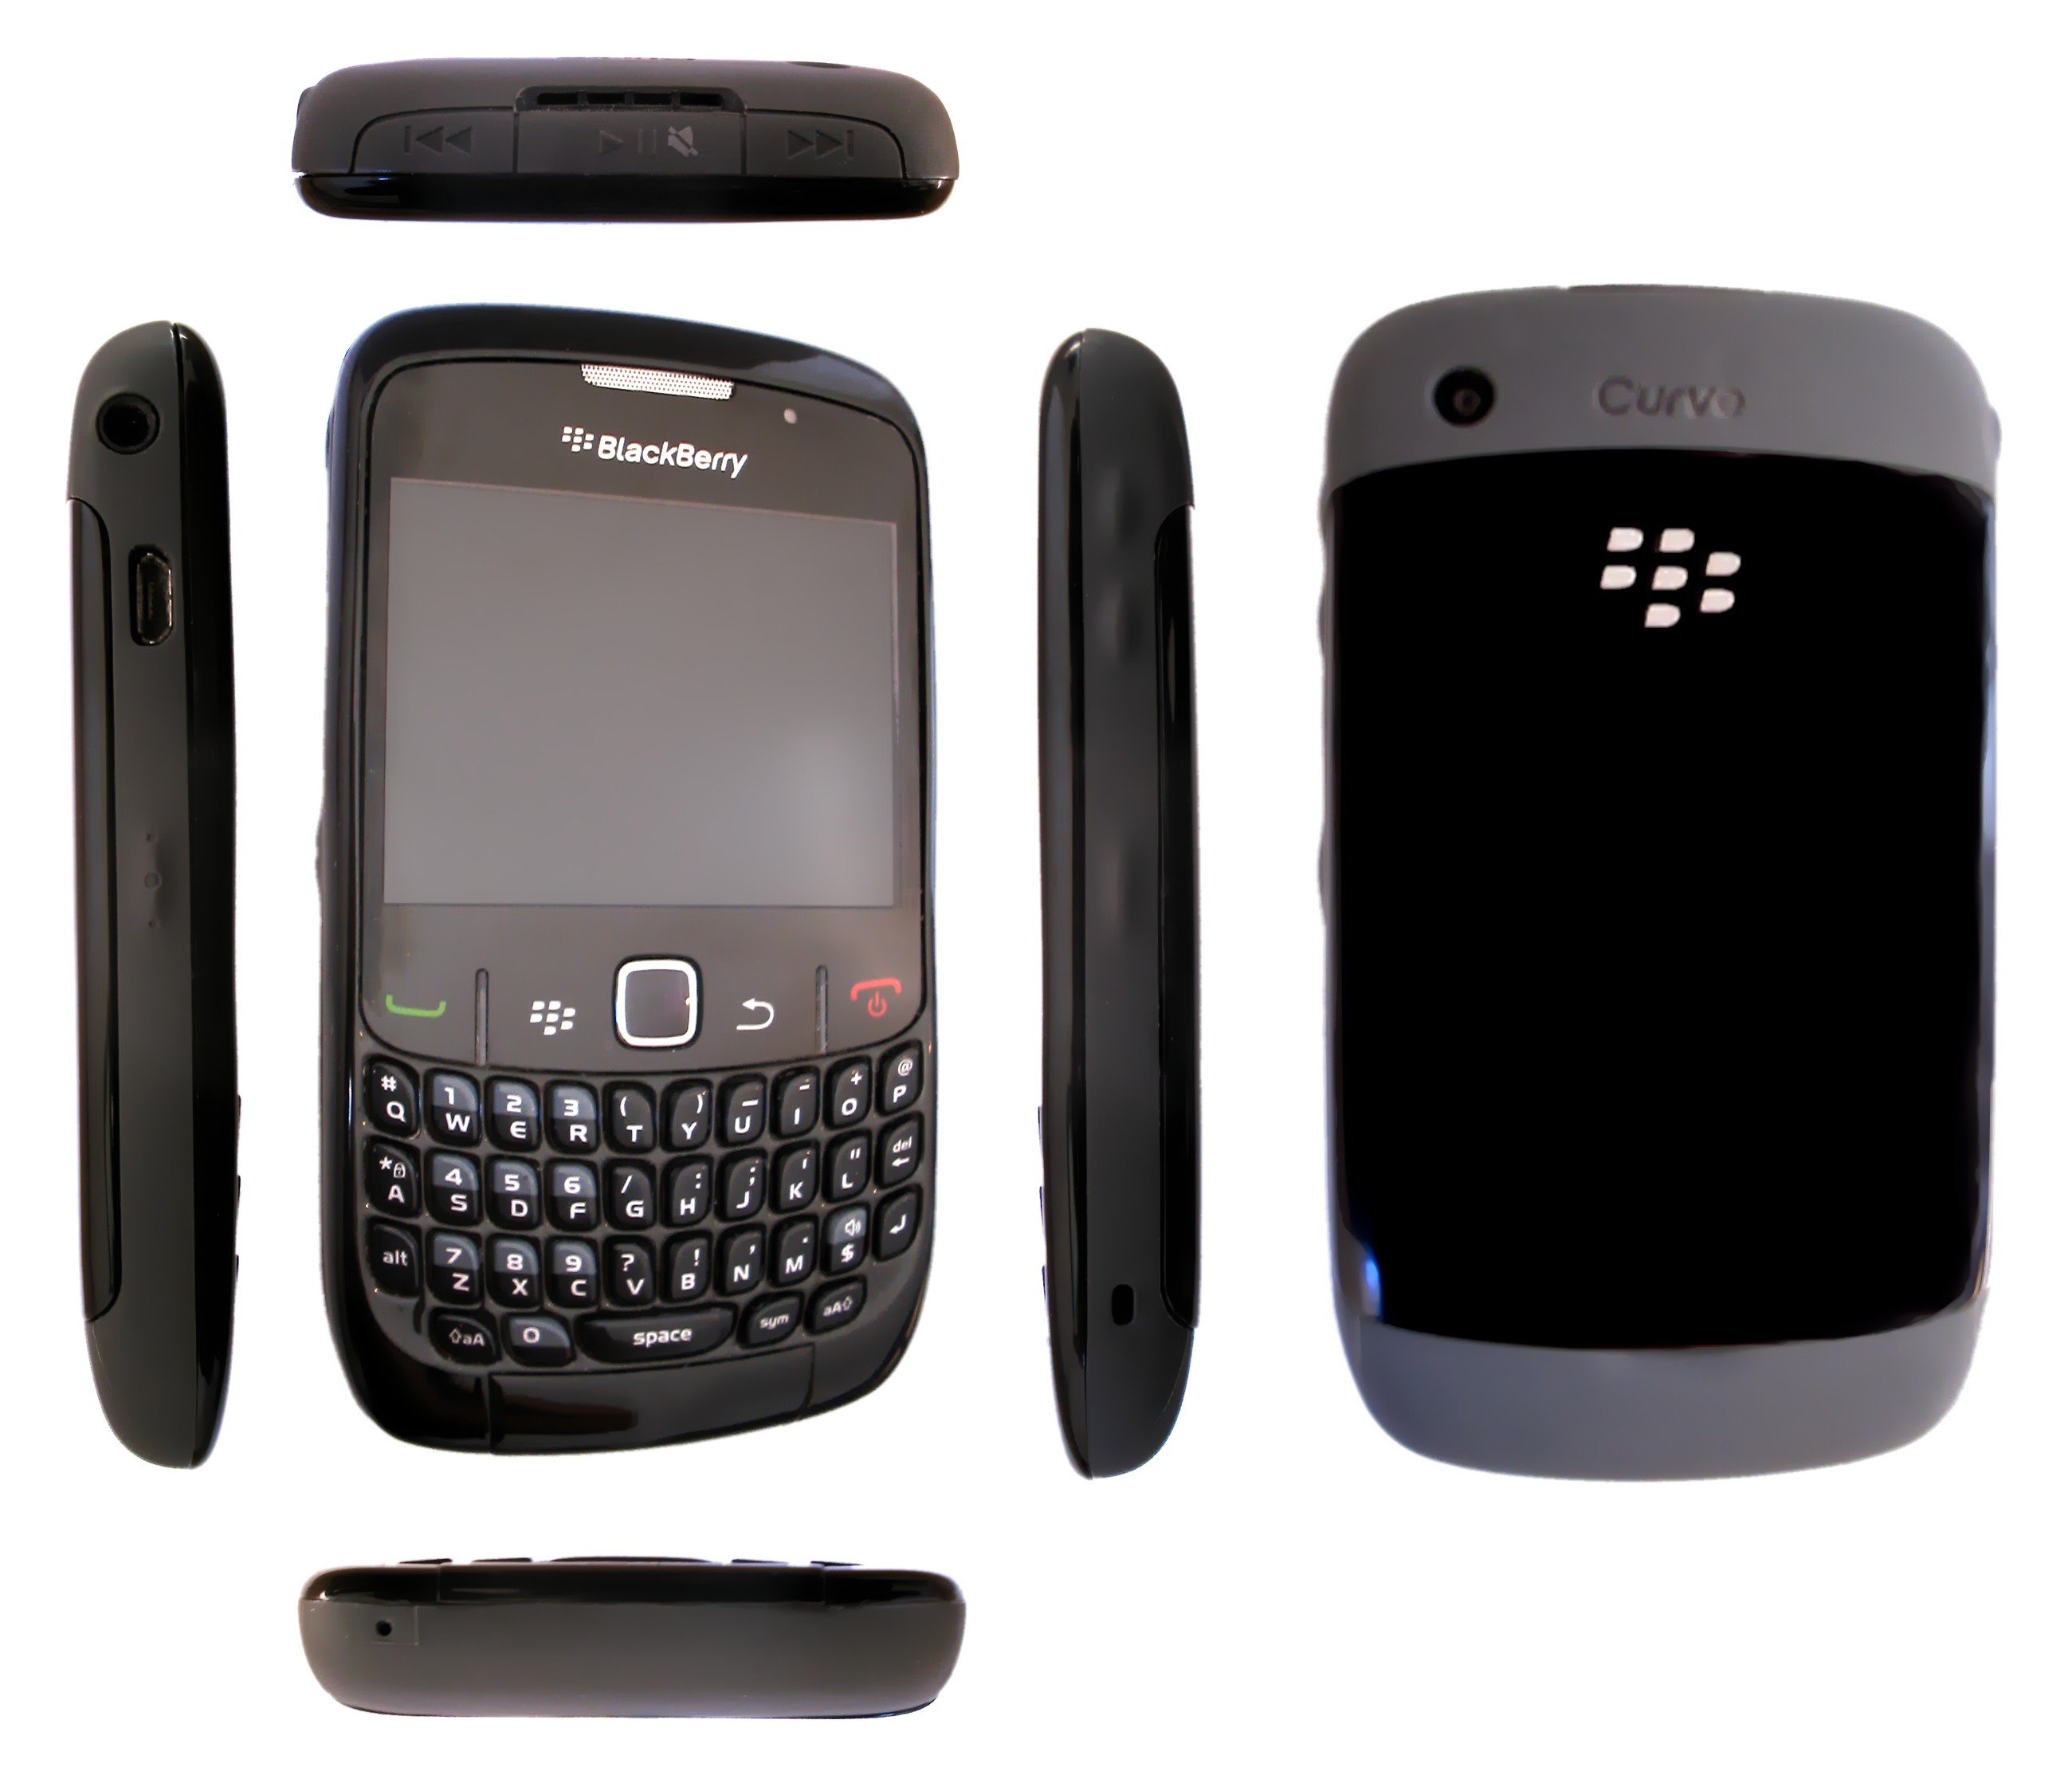 BlackBerry Curve 8520 specs, review, release date - PhonesData